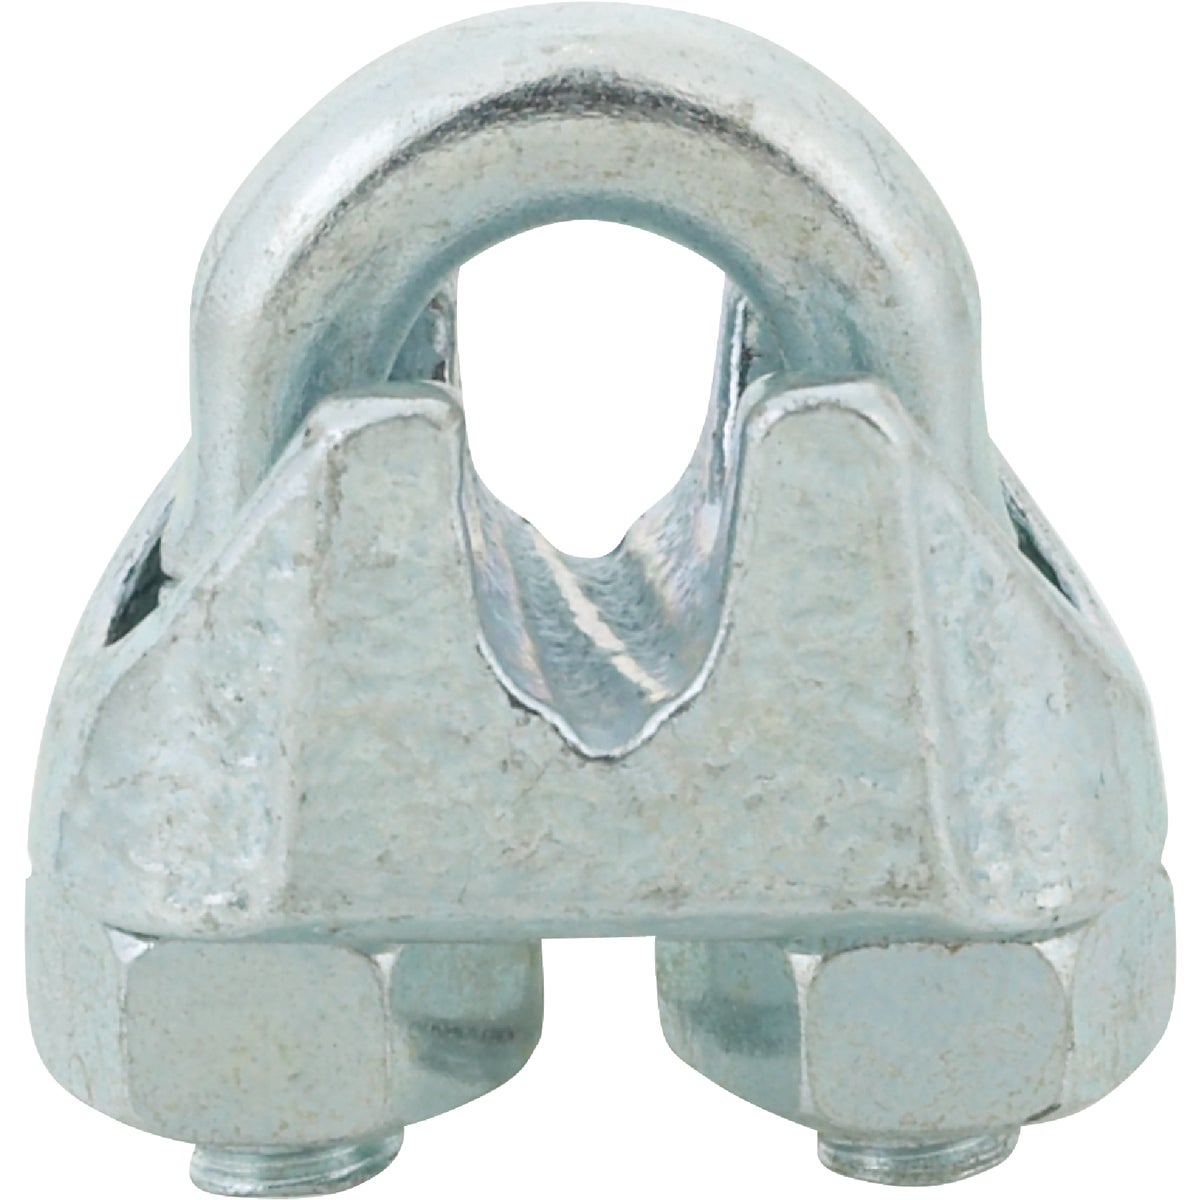 Item 737867, Durable malleable iron construction with a galvanized finish.